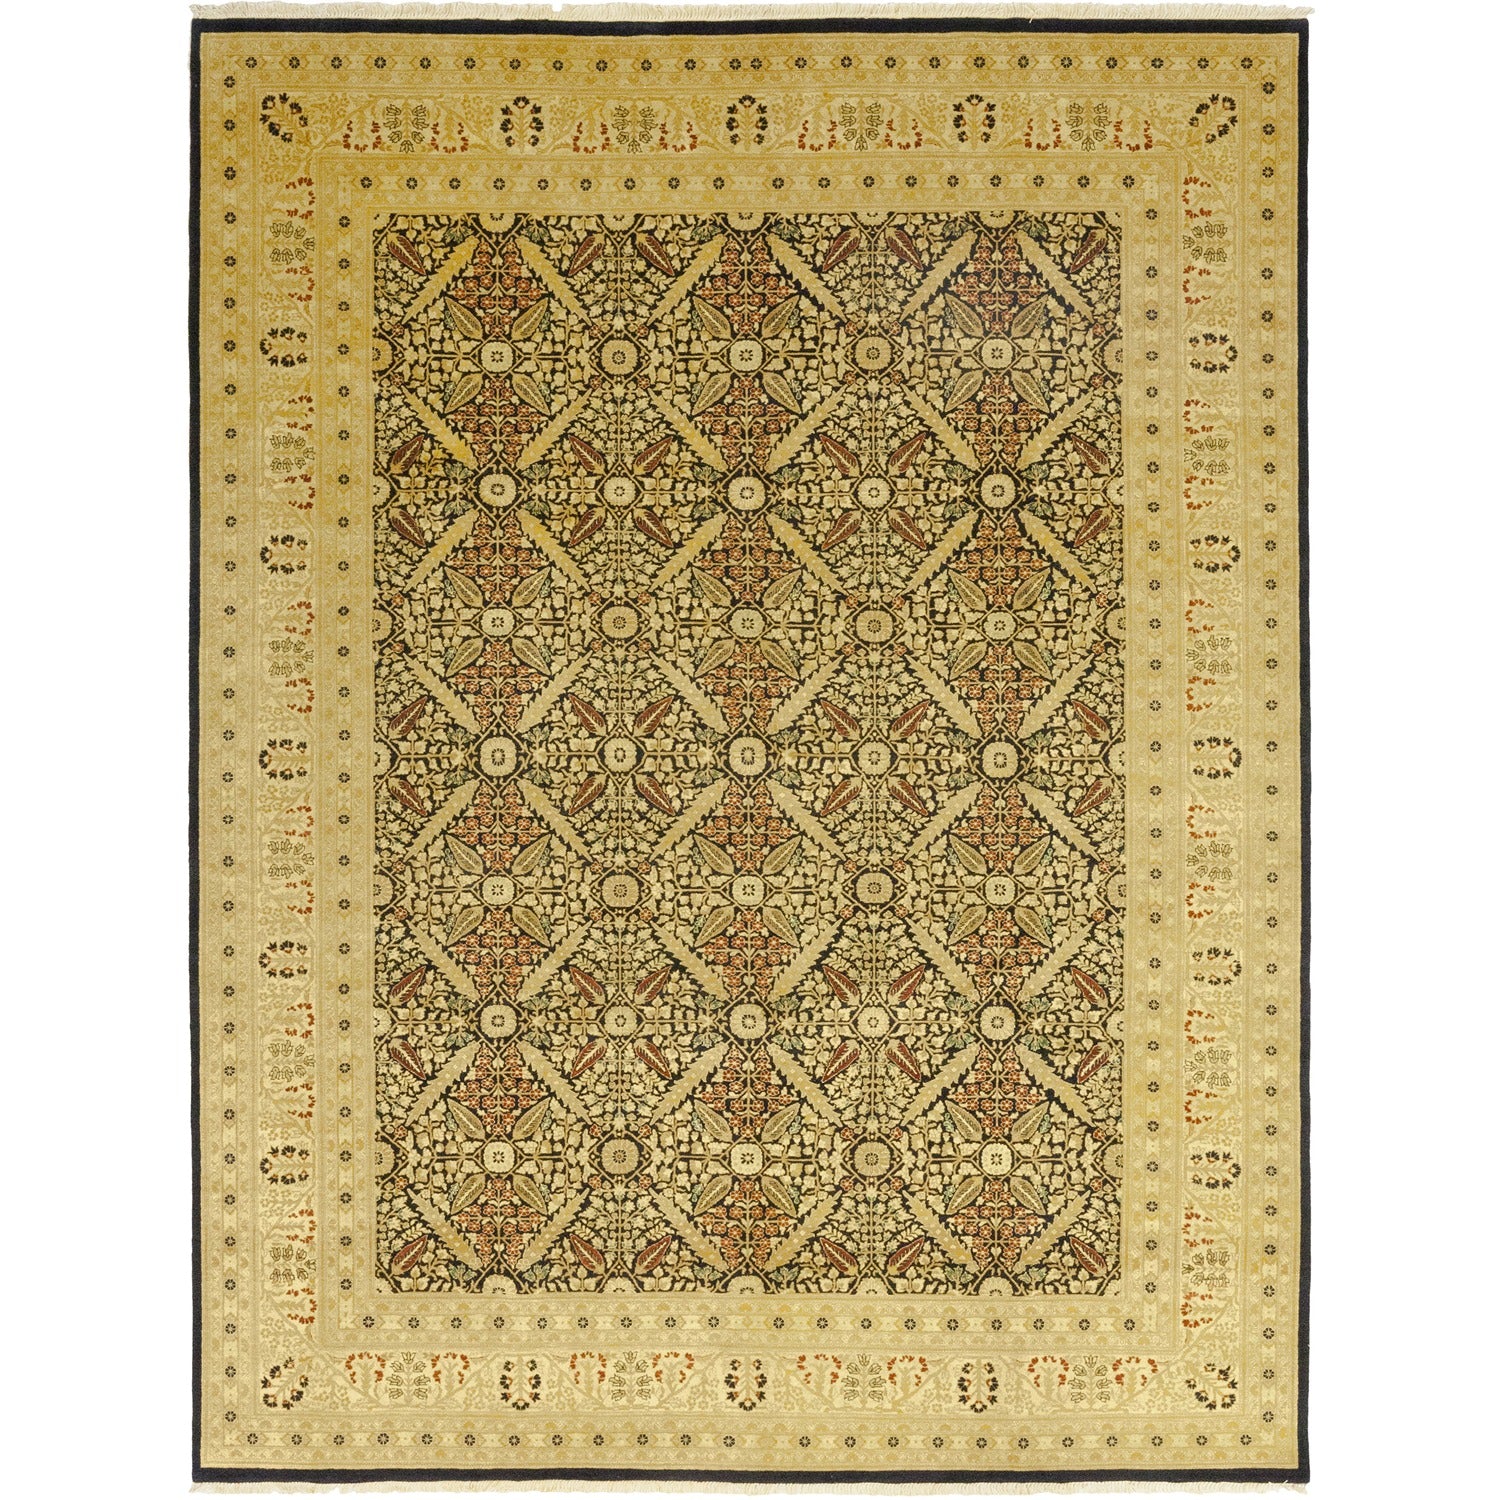 Ornate handcrafted rug with symmetrical geometric and floral patterns